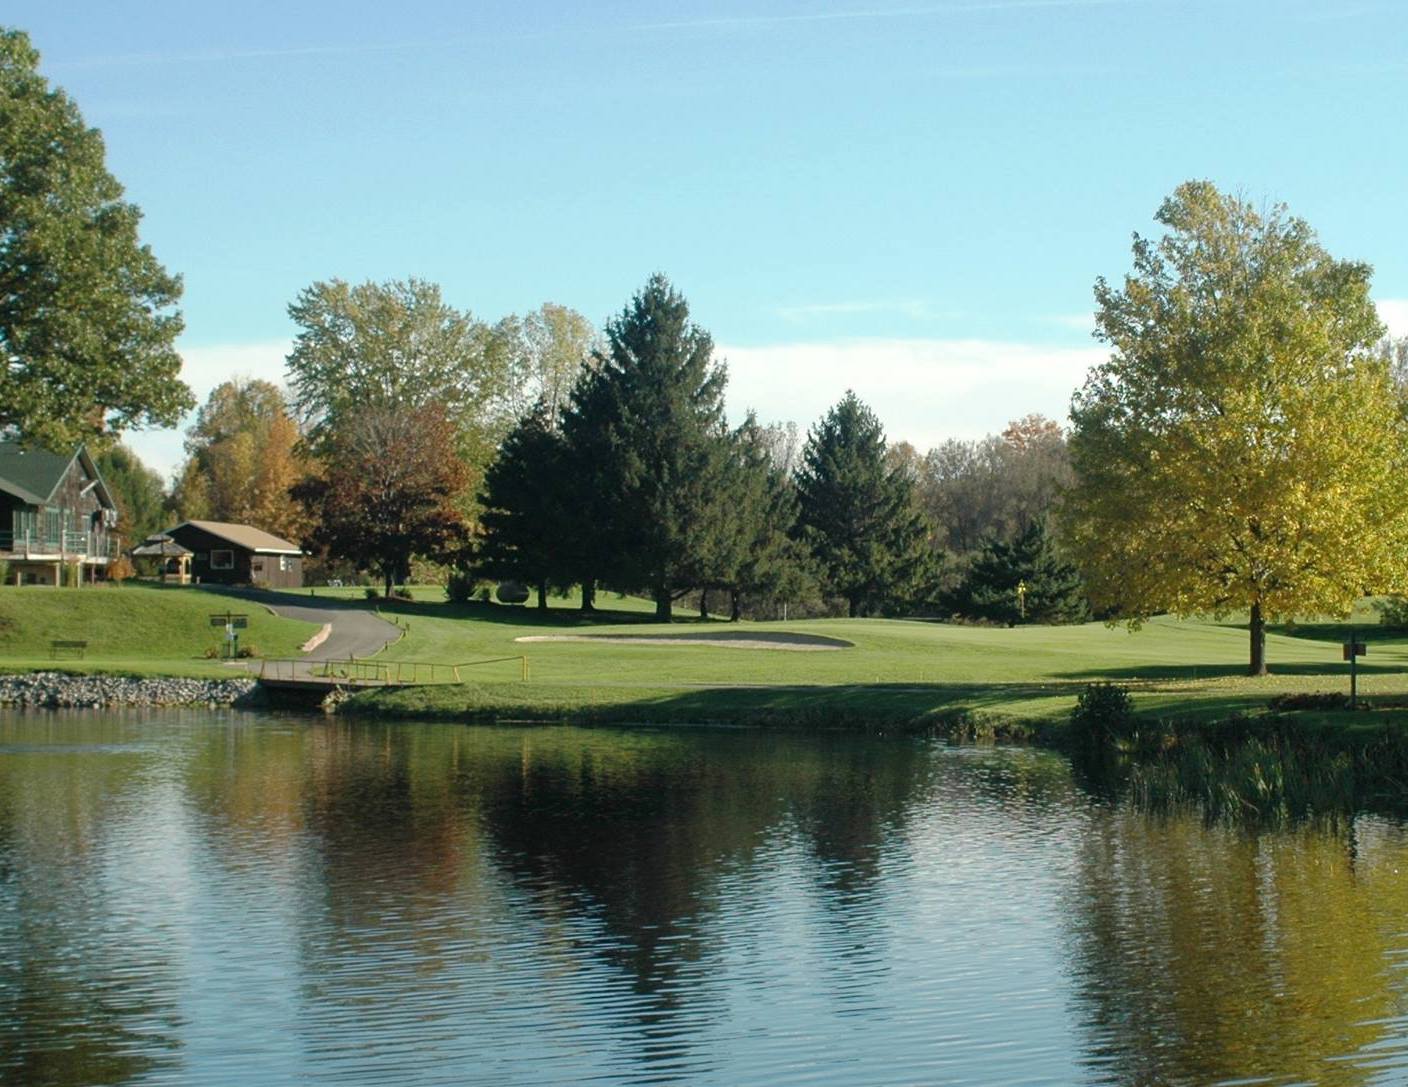 Kanon Valley Country Club